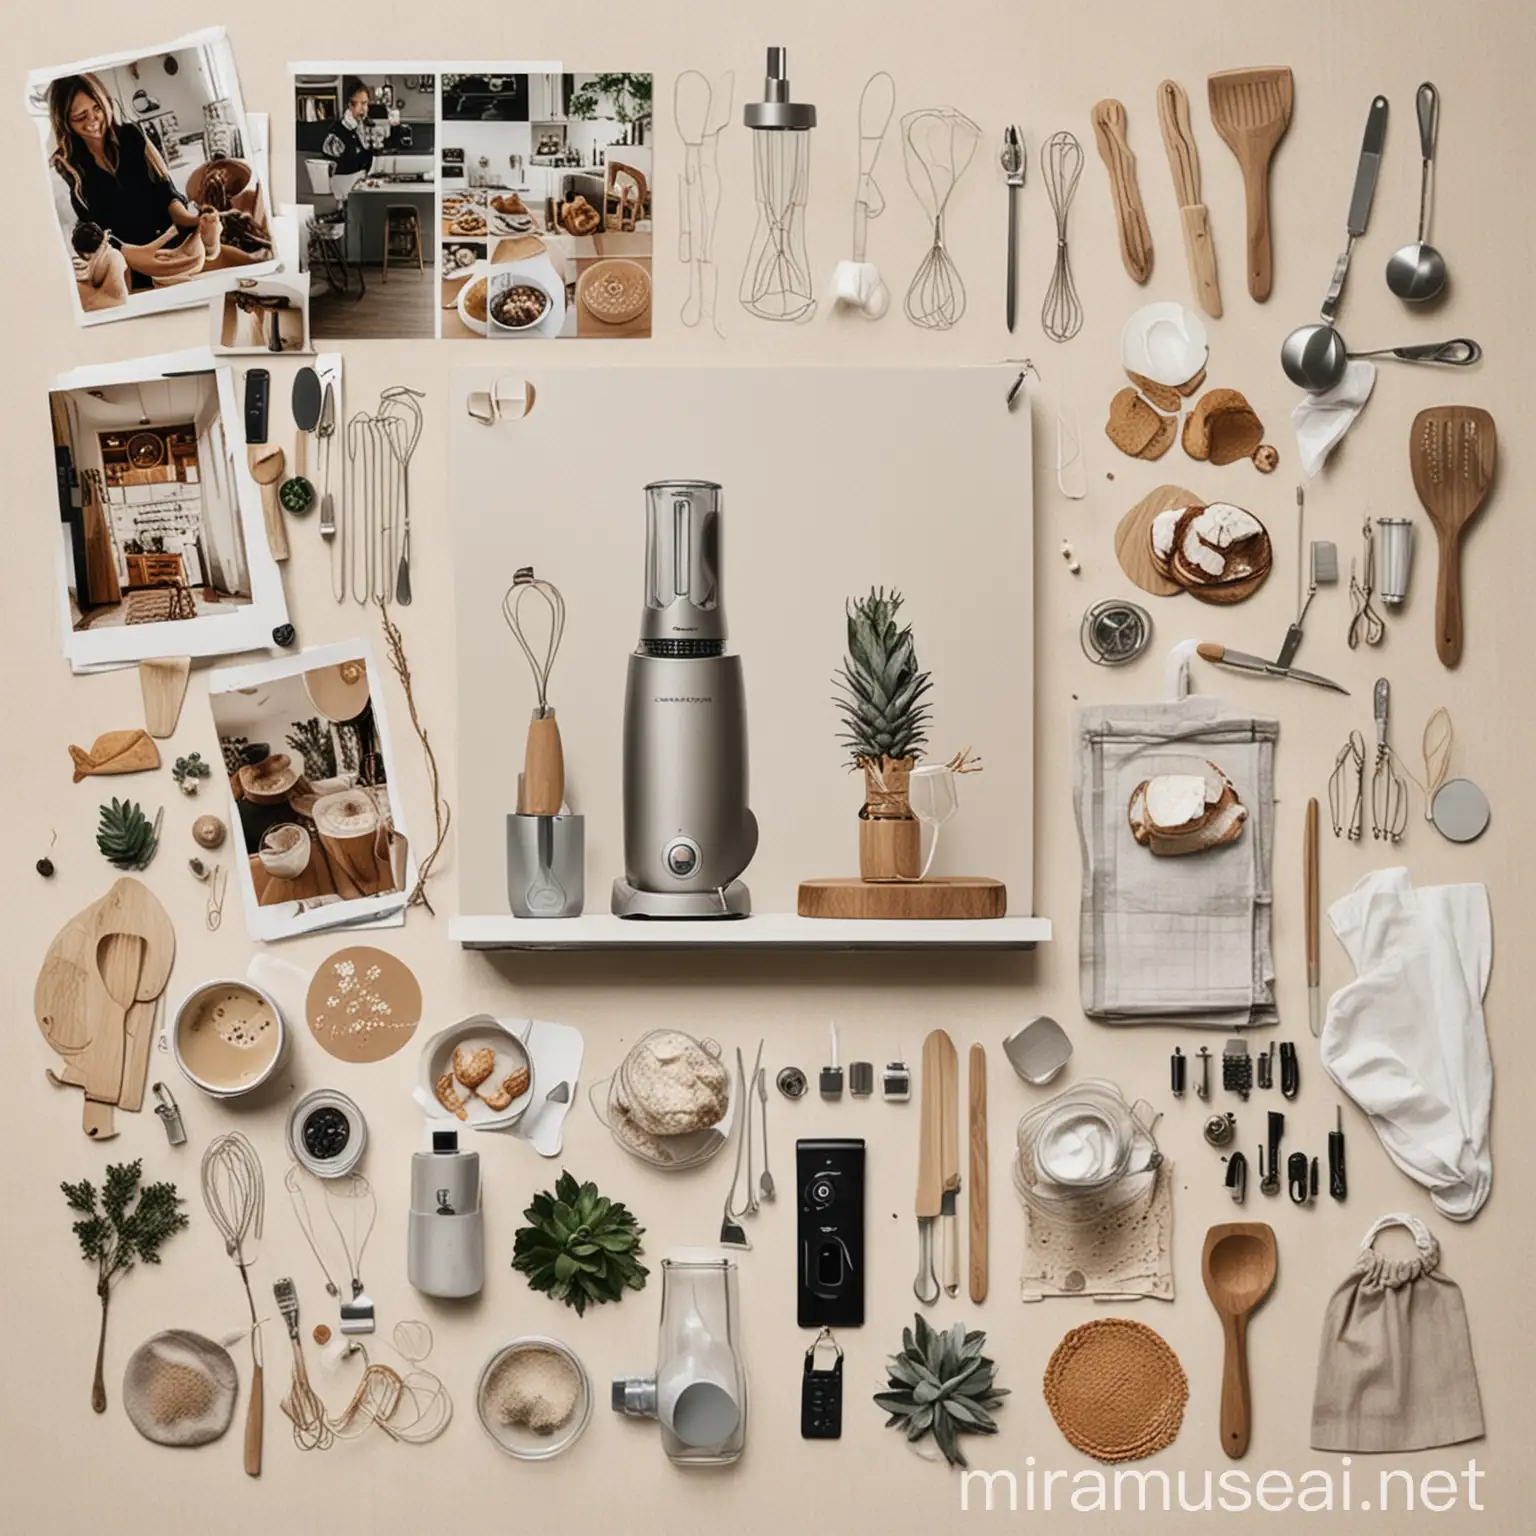 1-Prepare a mood board which includes product examples, family with kids and the environment images. The product examples in the mood board should include products including hand blender and kitchen tools. The environment images in the mood board should be living room and kitchen.